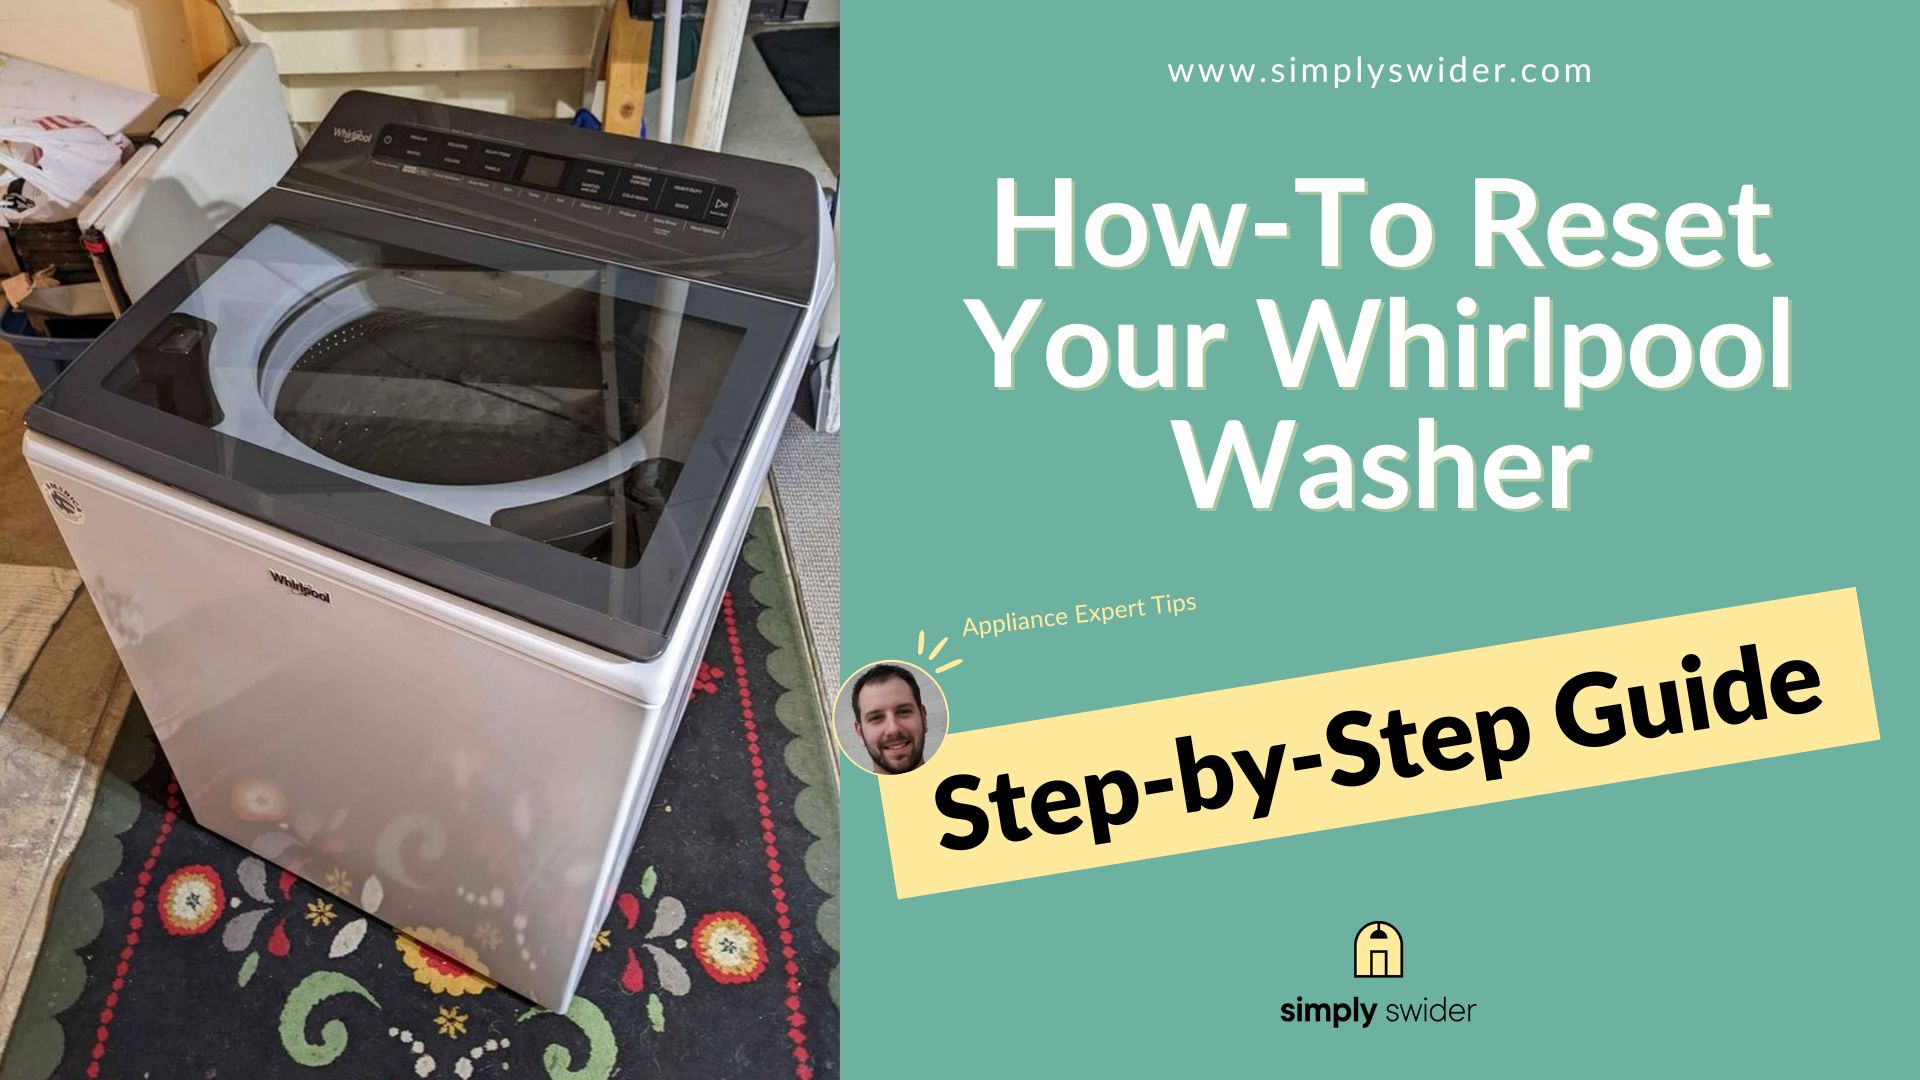 How-To Reset Your Whirlpool Washer